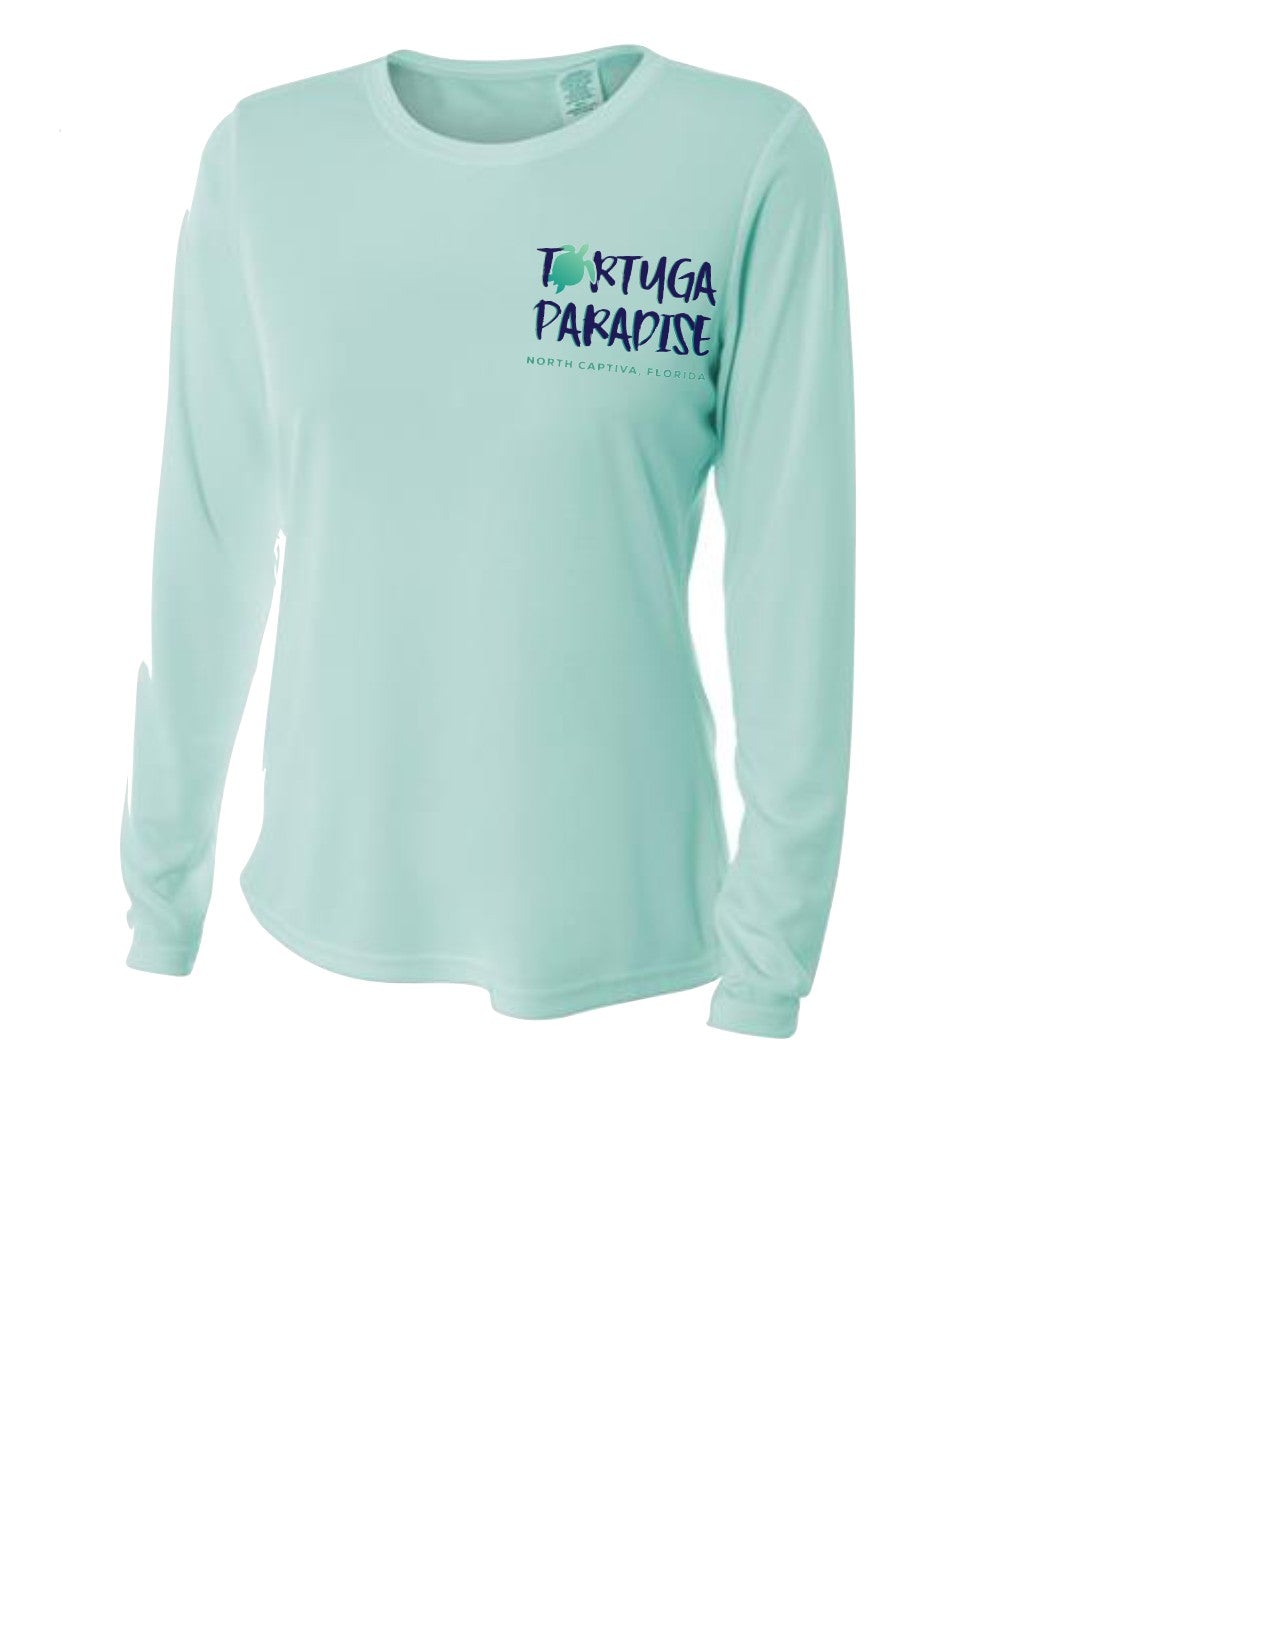 Women's Cooling Long Sleeve with back option C